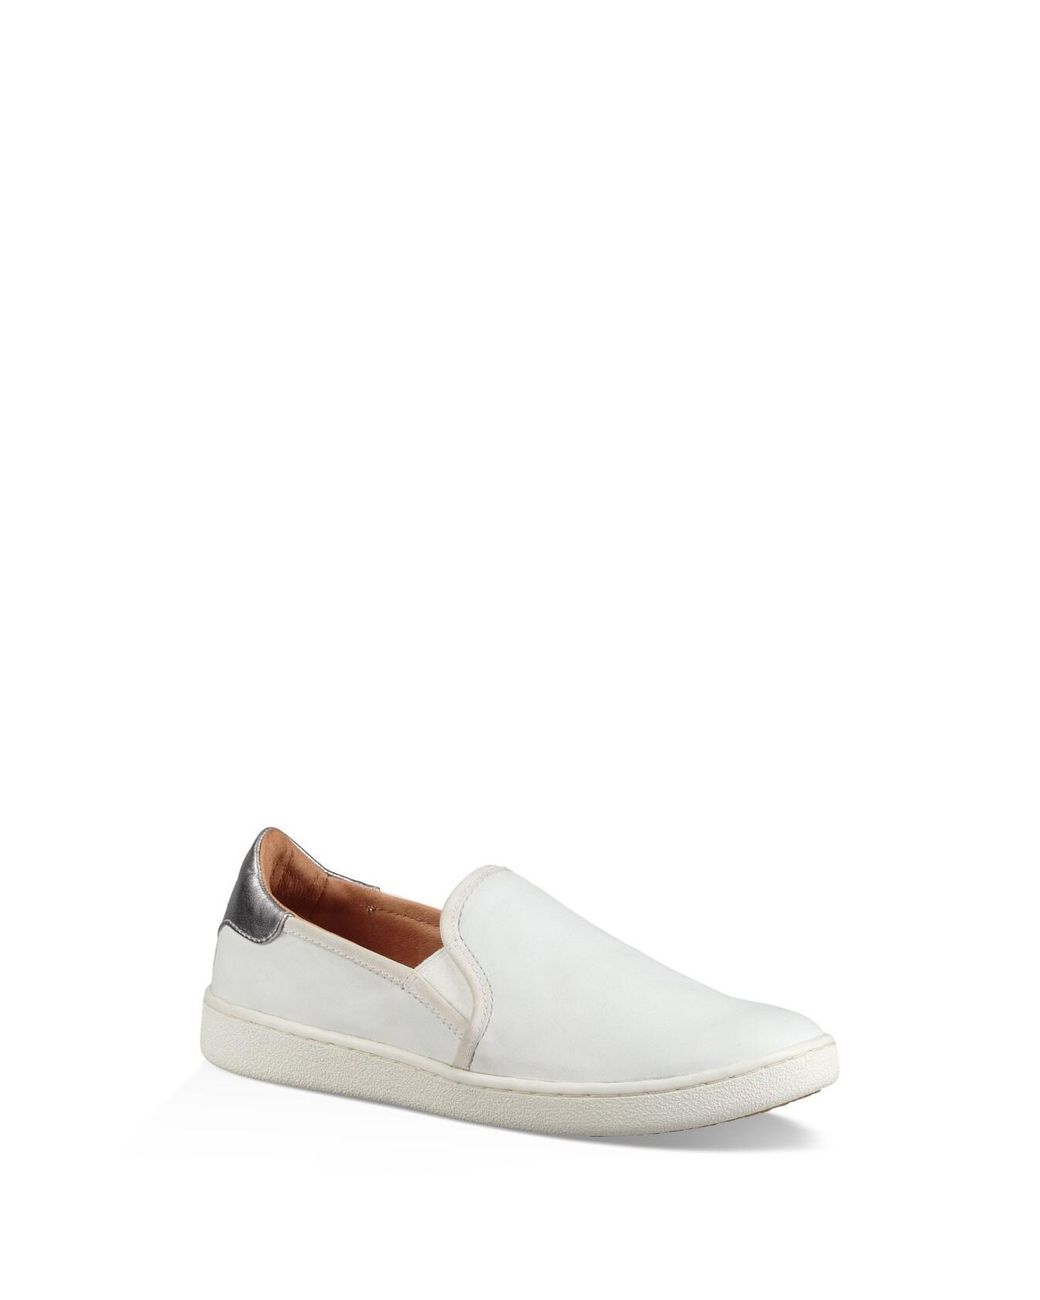 UGG Cas Slip-on Leather Sneakers in White | Lyst